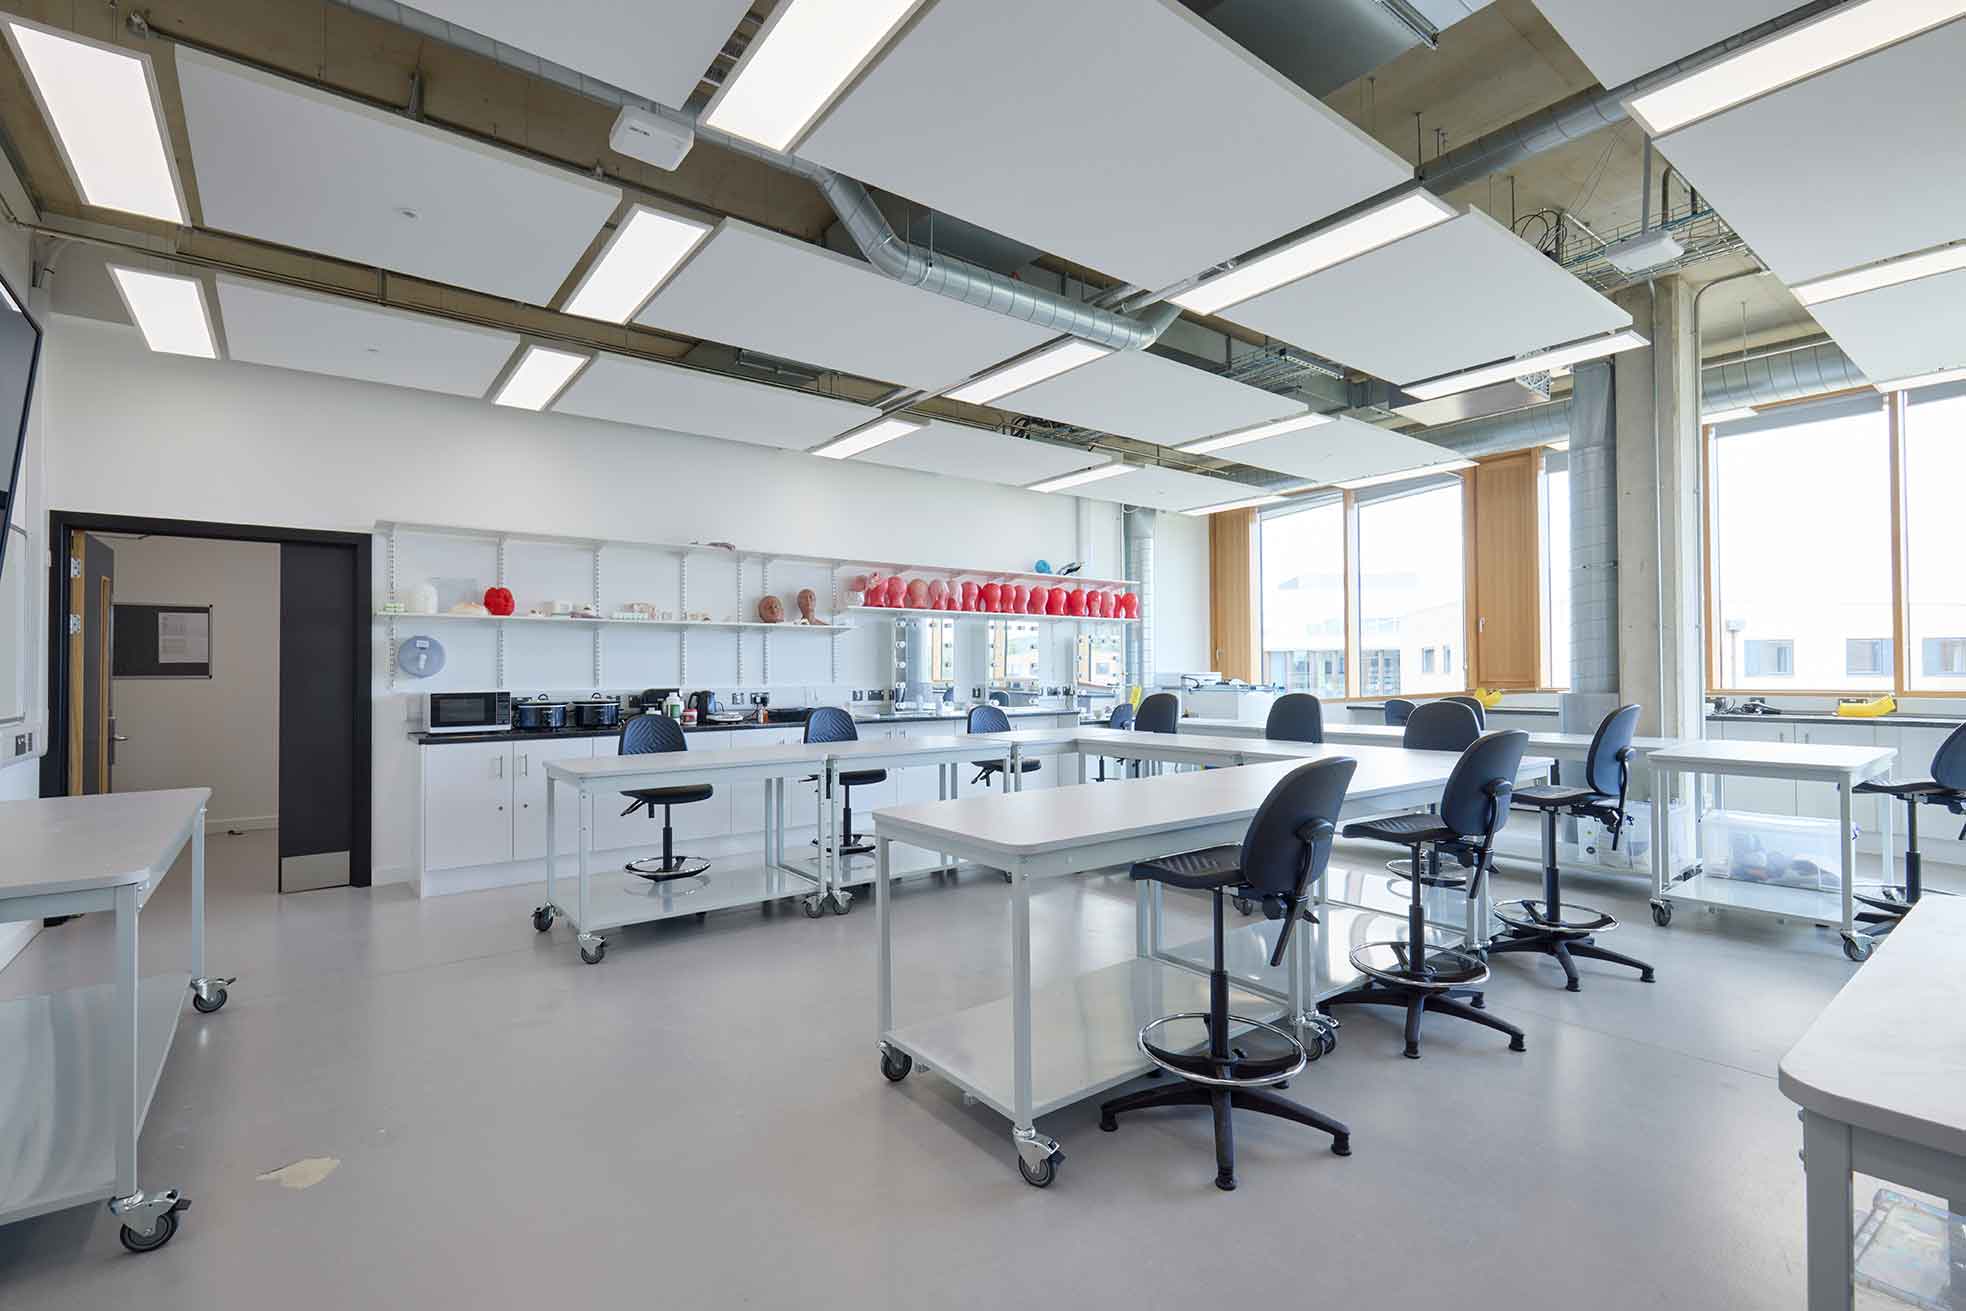 The photo shows the Hair, Makeup and Prosthetics studio in the Creative Hub at the University of Northampton. In the background are floor-to-ceiling windows and in the foreground are swivel stools and workbenches. There are several pieces of specialist palette mixing equipment and a row of cosmetology mannequins arranged along the back wall in the photograph